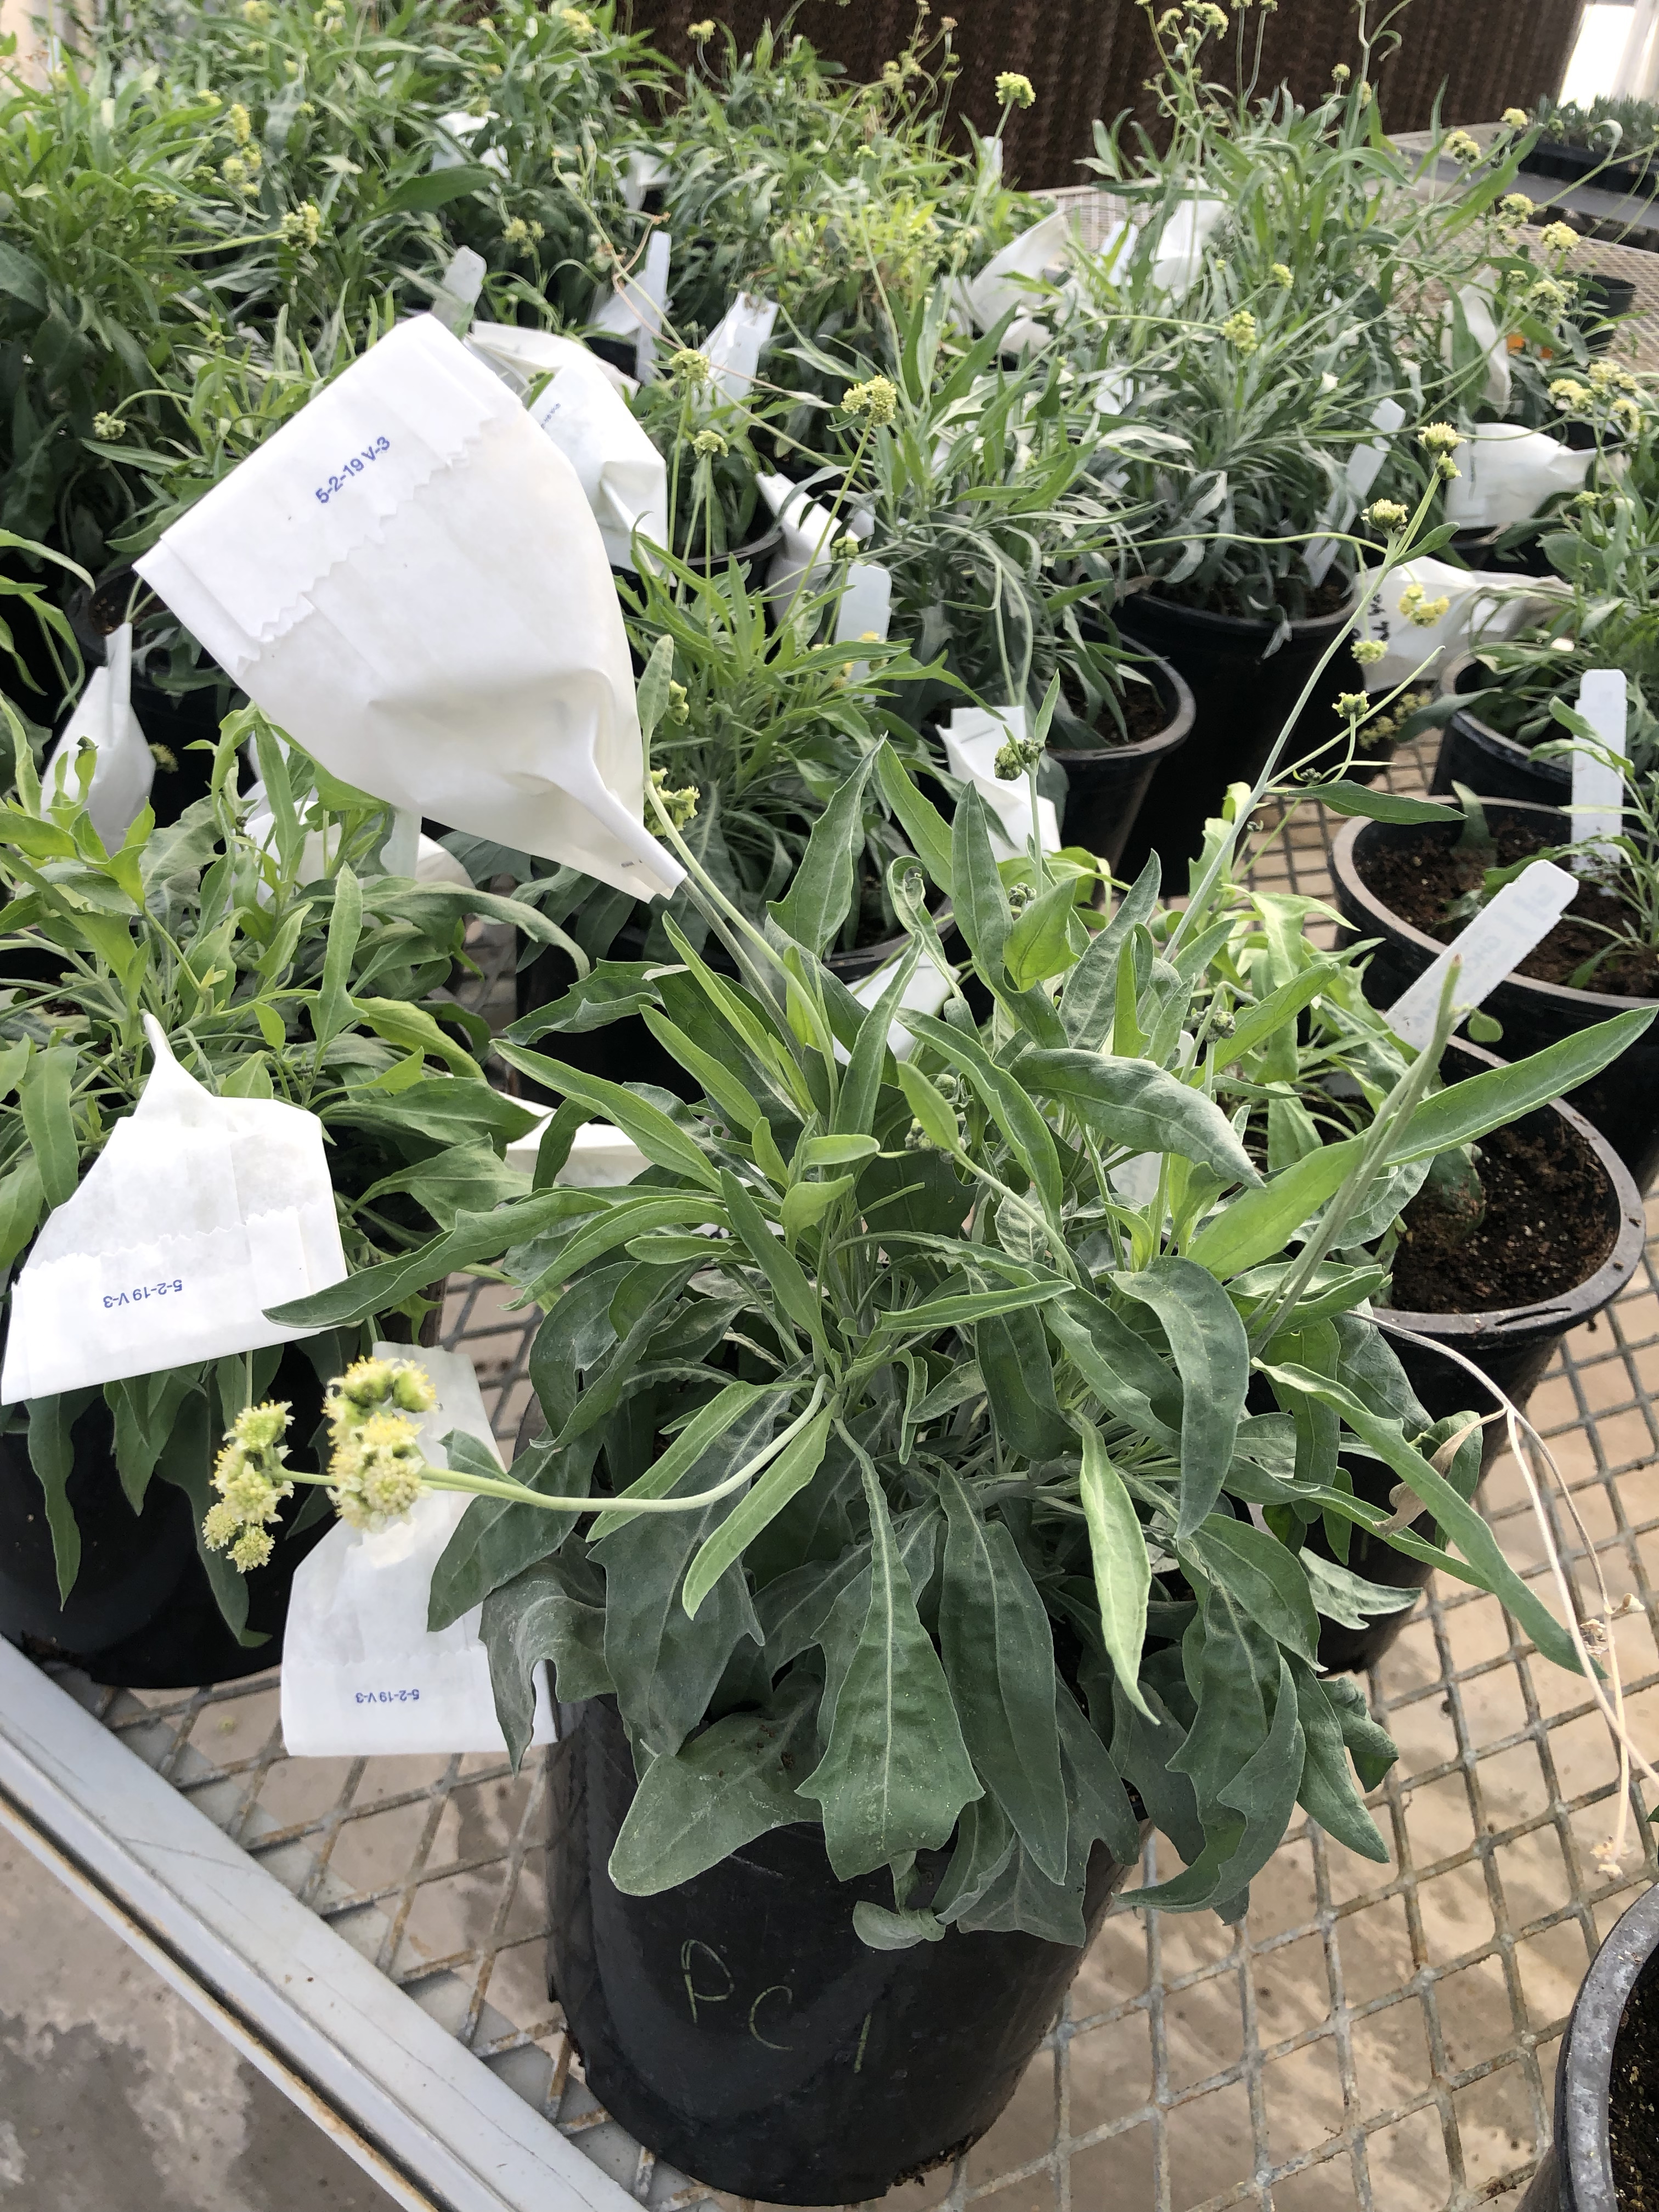 Guayule seed collection